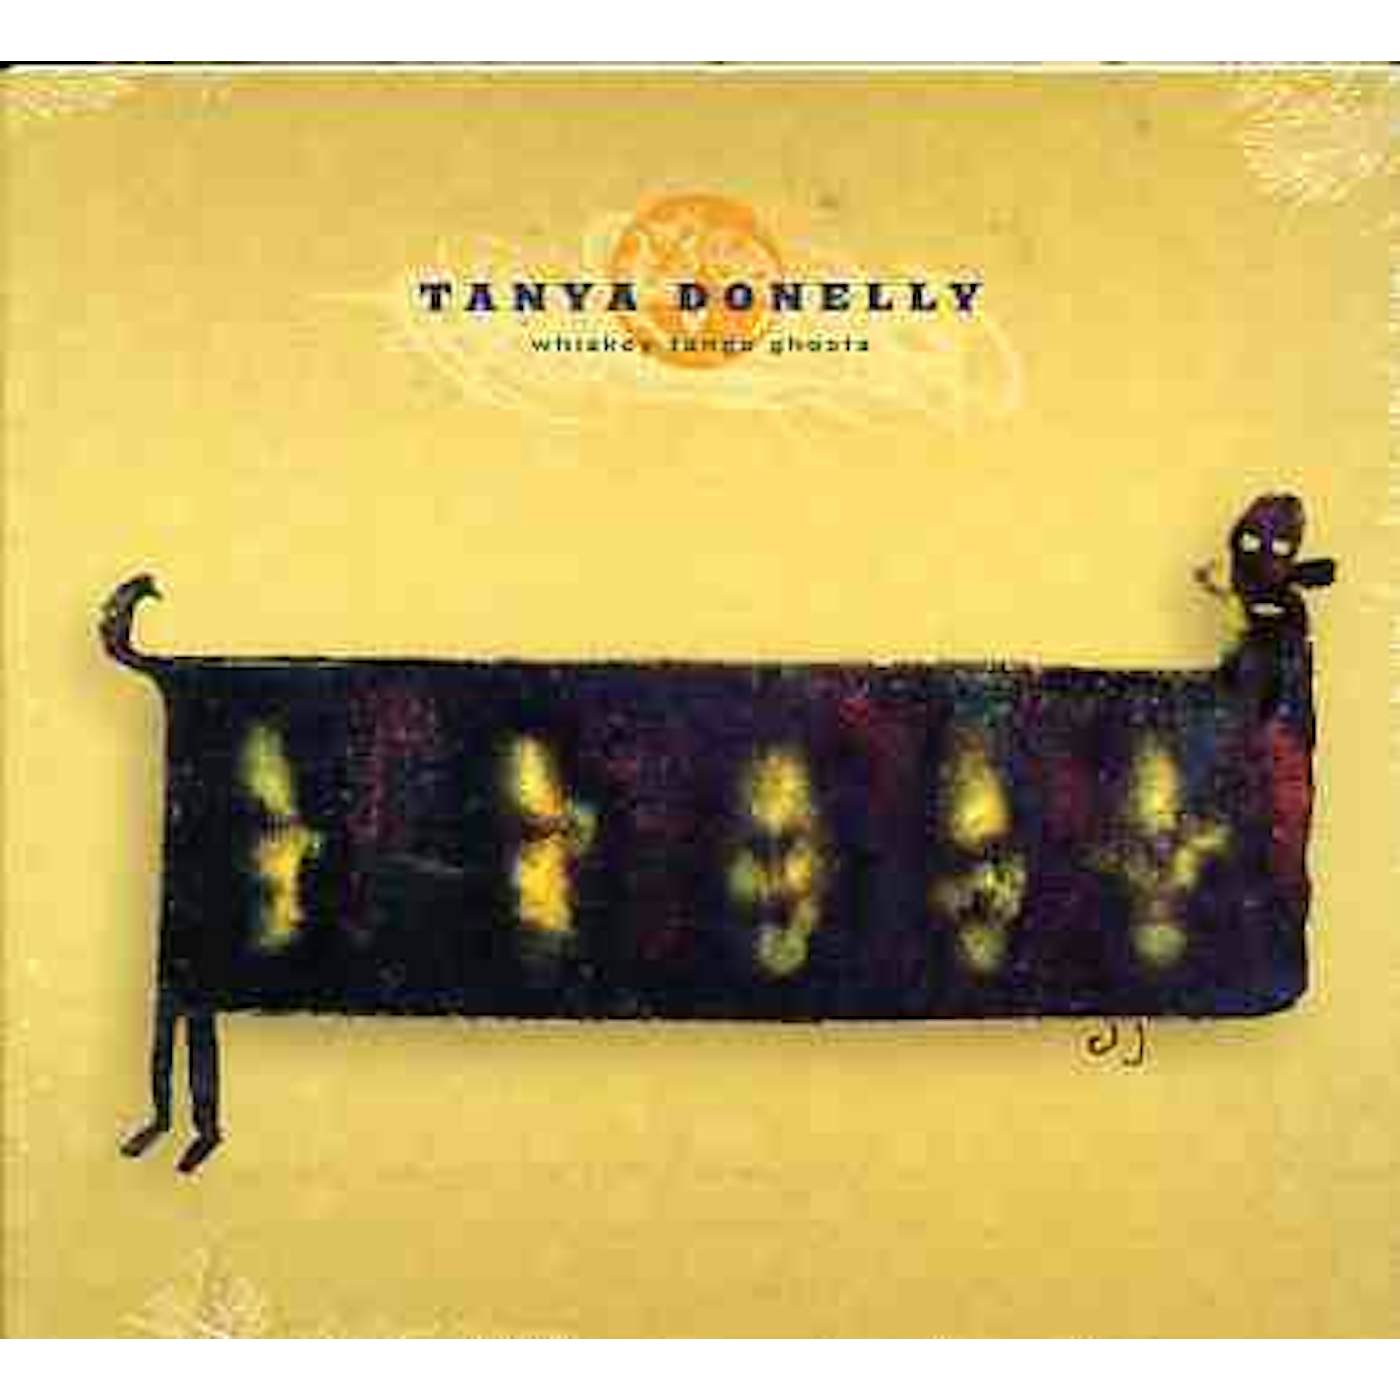 Tanya Donelly WHISKEY TANGO GHOSTS CD